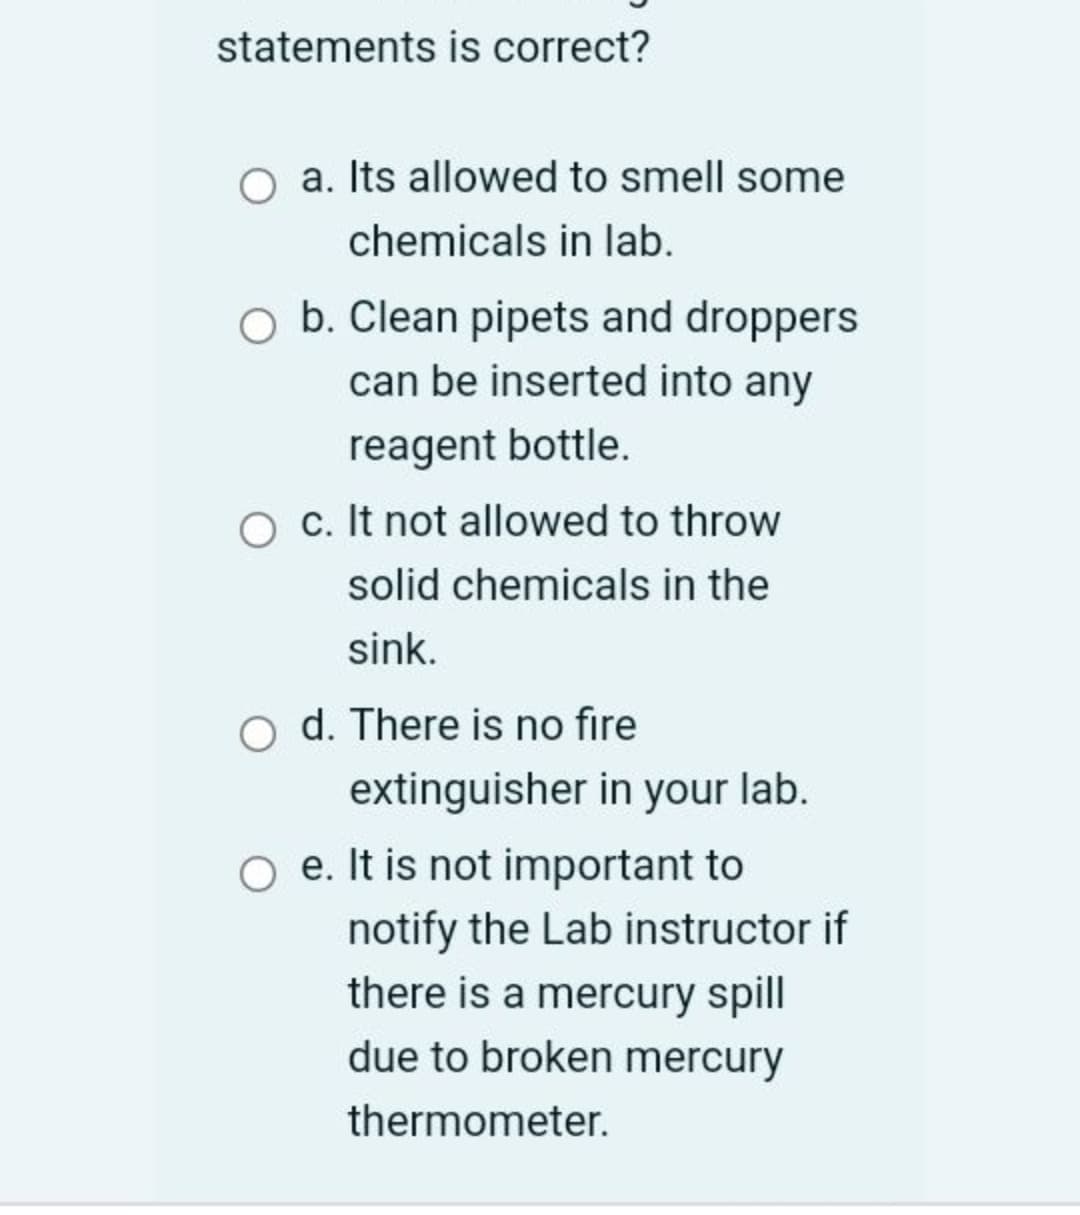 statements is correct?
O a. Its allowed to smell some
chemicals in lab.
O b. Clean pipets and droppers
can be inserted into any
reagent bottle.
c. It not allowed to throw
solid chemicals in the
sink.
o d. There is no fire
extinguisher in your lab.
e. It is not important to
notify the Lab instructor if
there is a mercury spill
due to broken mercury
thermometer.
